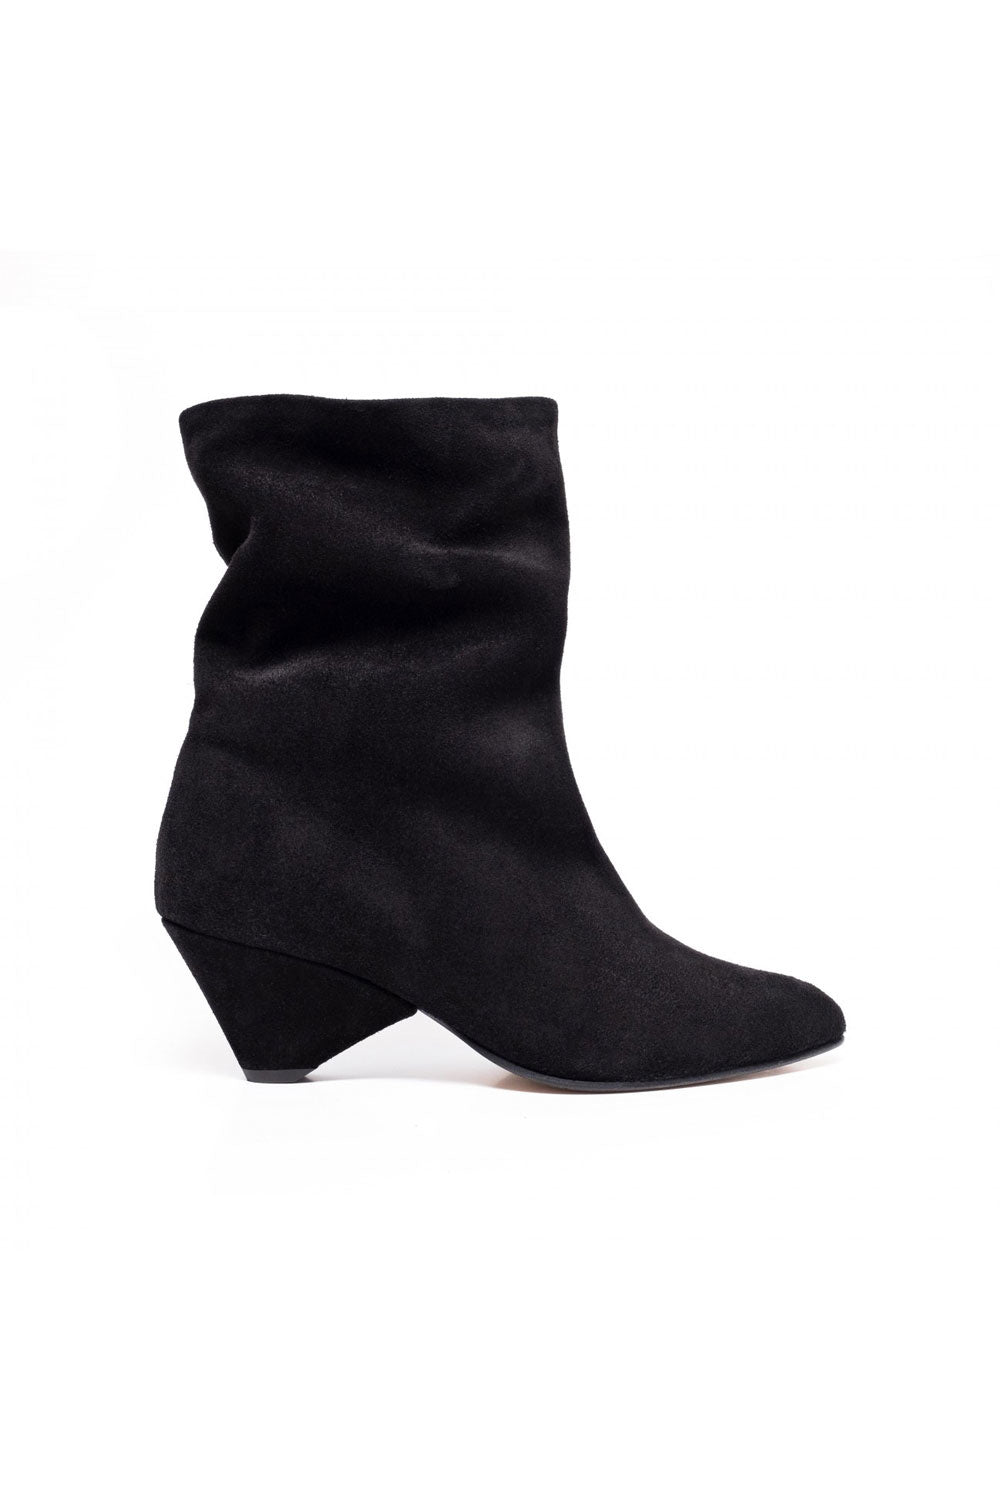 Vully 50 Triangle Calf Suede Boot - Black